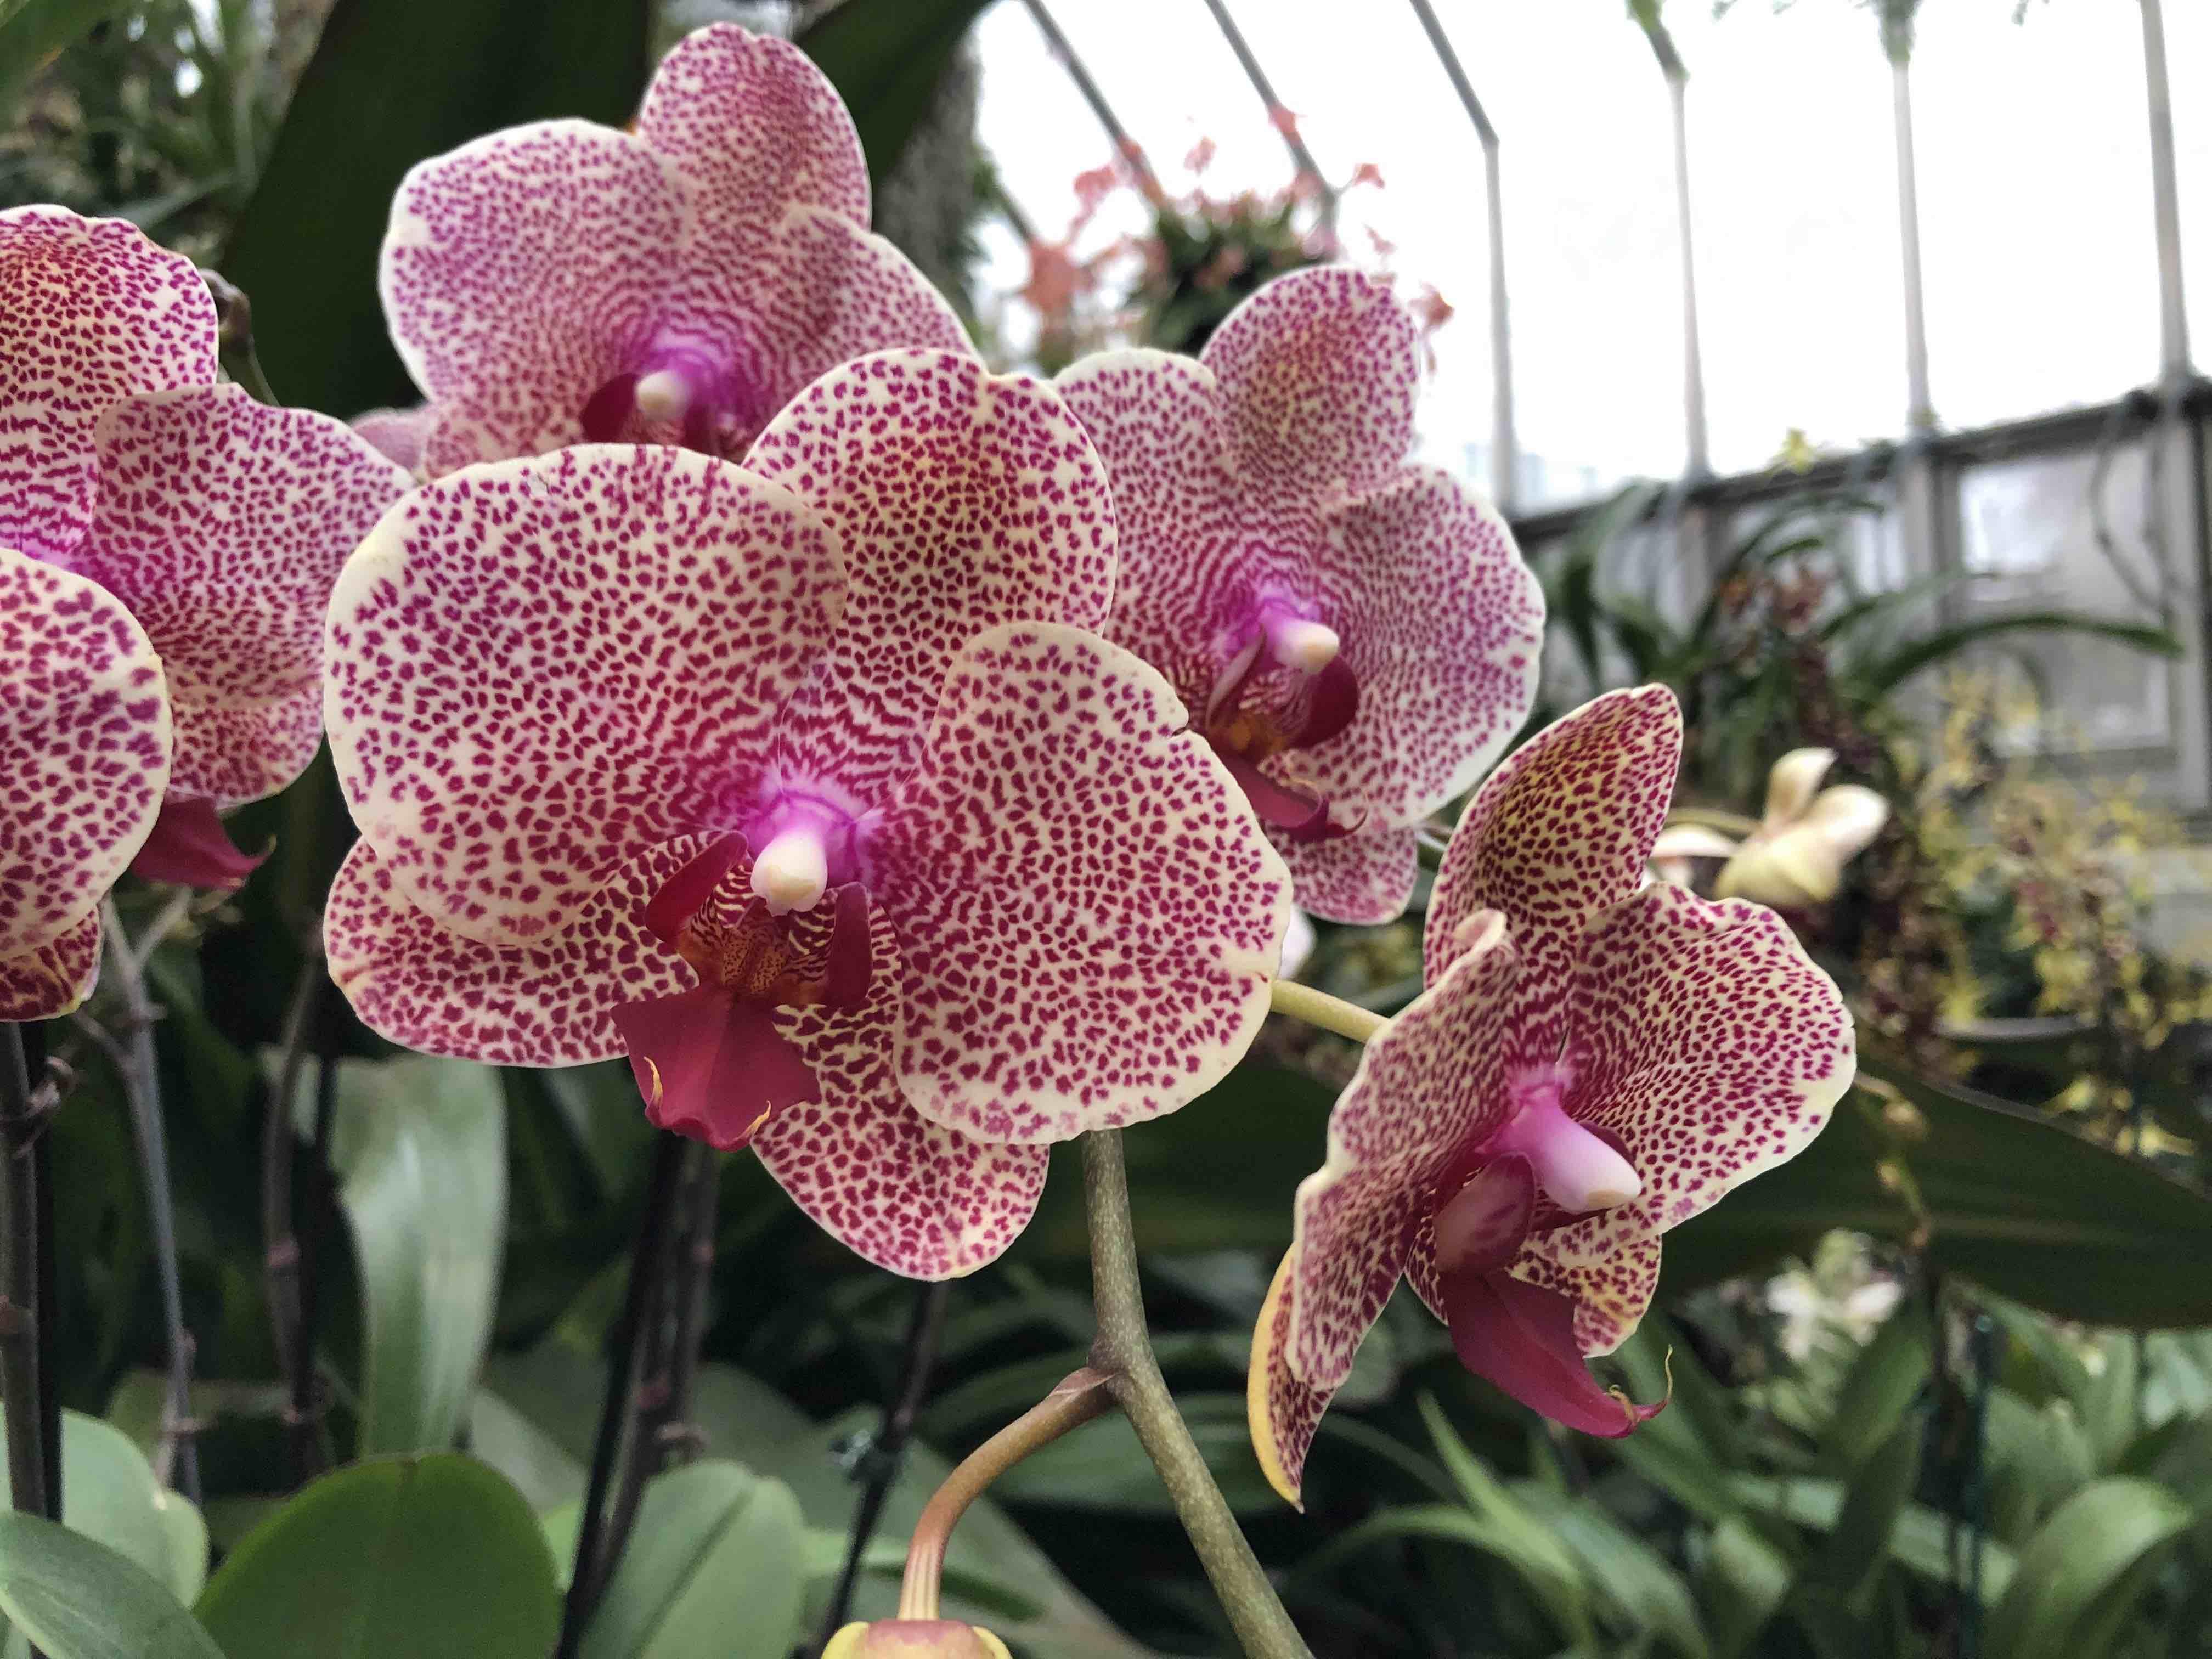 The Chicago Botanic Garden's orchid show is a colorful sight for winter weary eyes. (Patty Wetli / WTTW News)